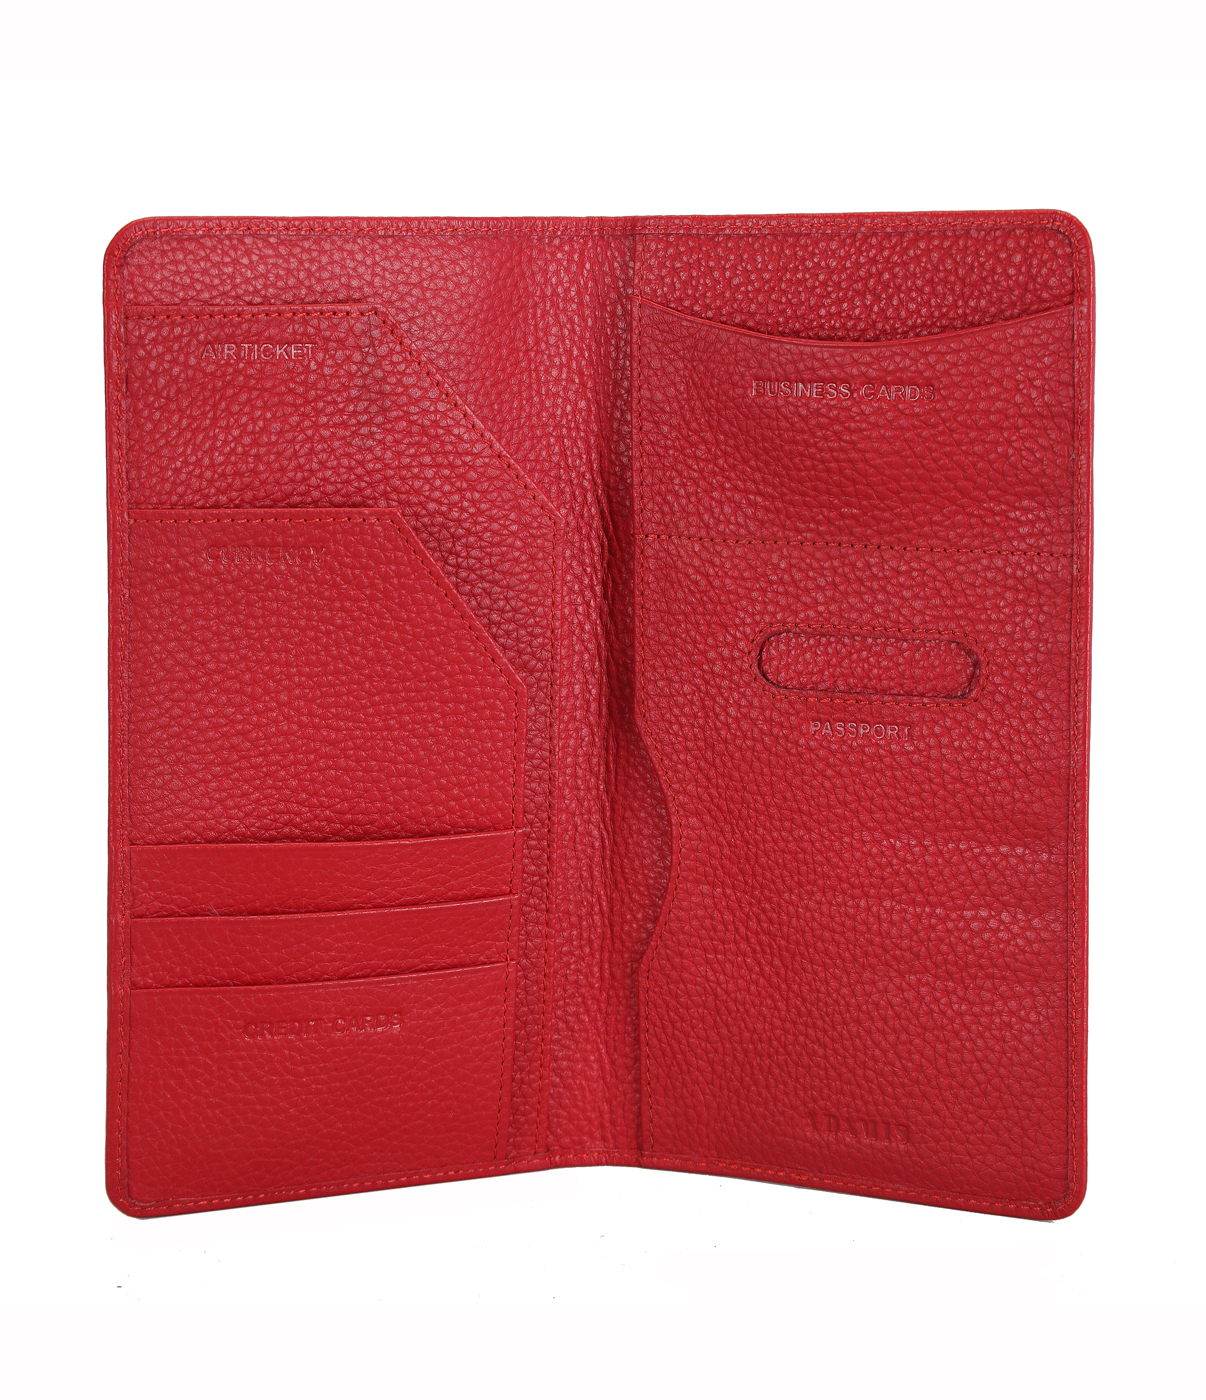 Wallet-Rafel-Travel document wallet in Genuine Leather - Red